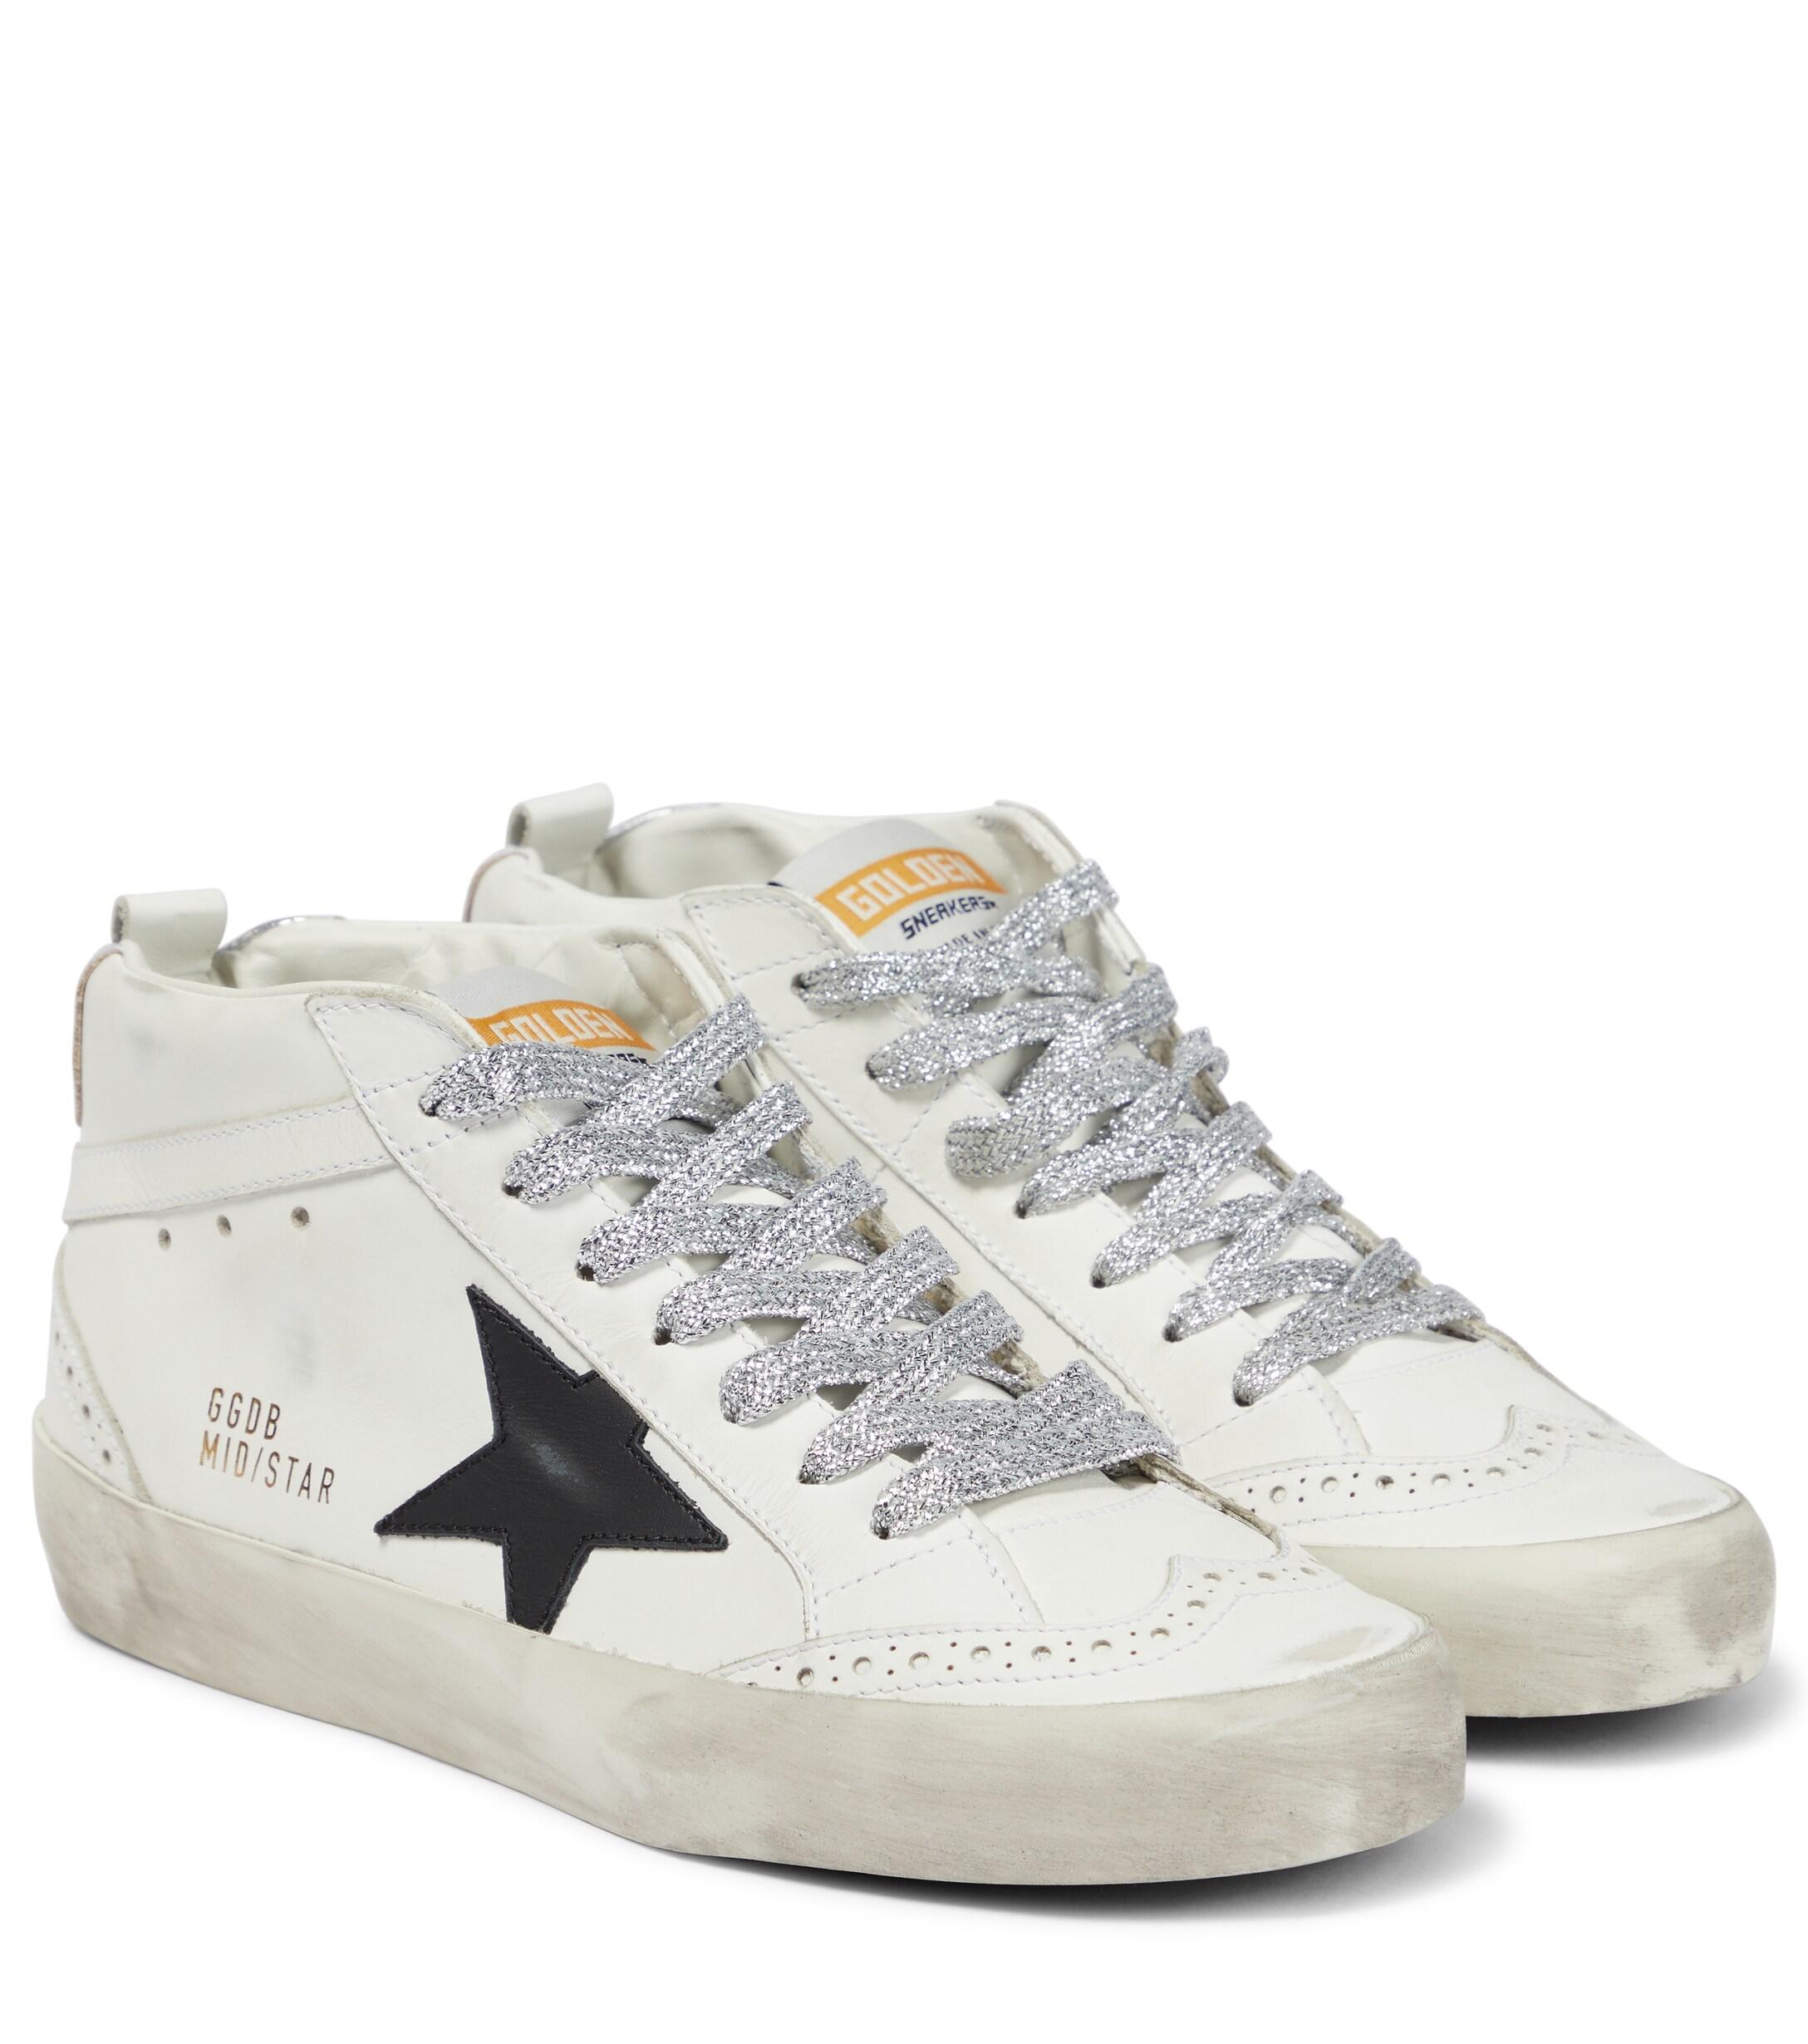 Golden Goose Mid Star Leather Sneakers in White | Lyst